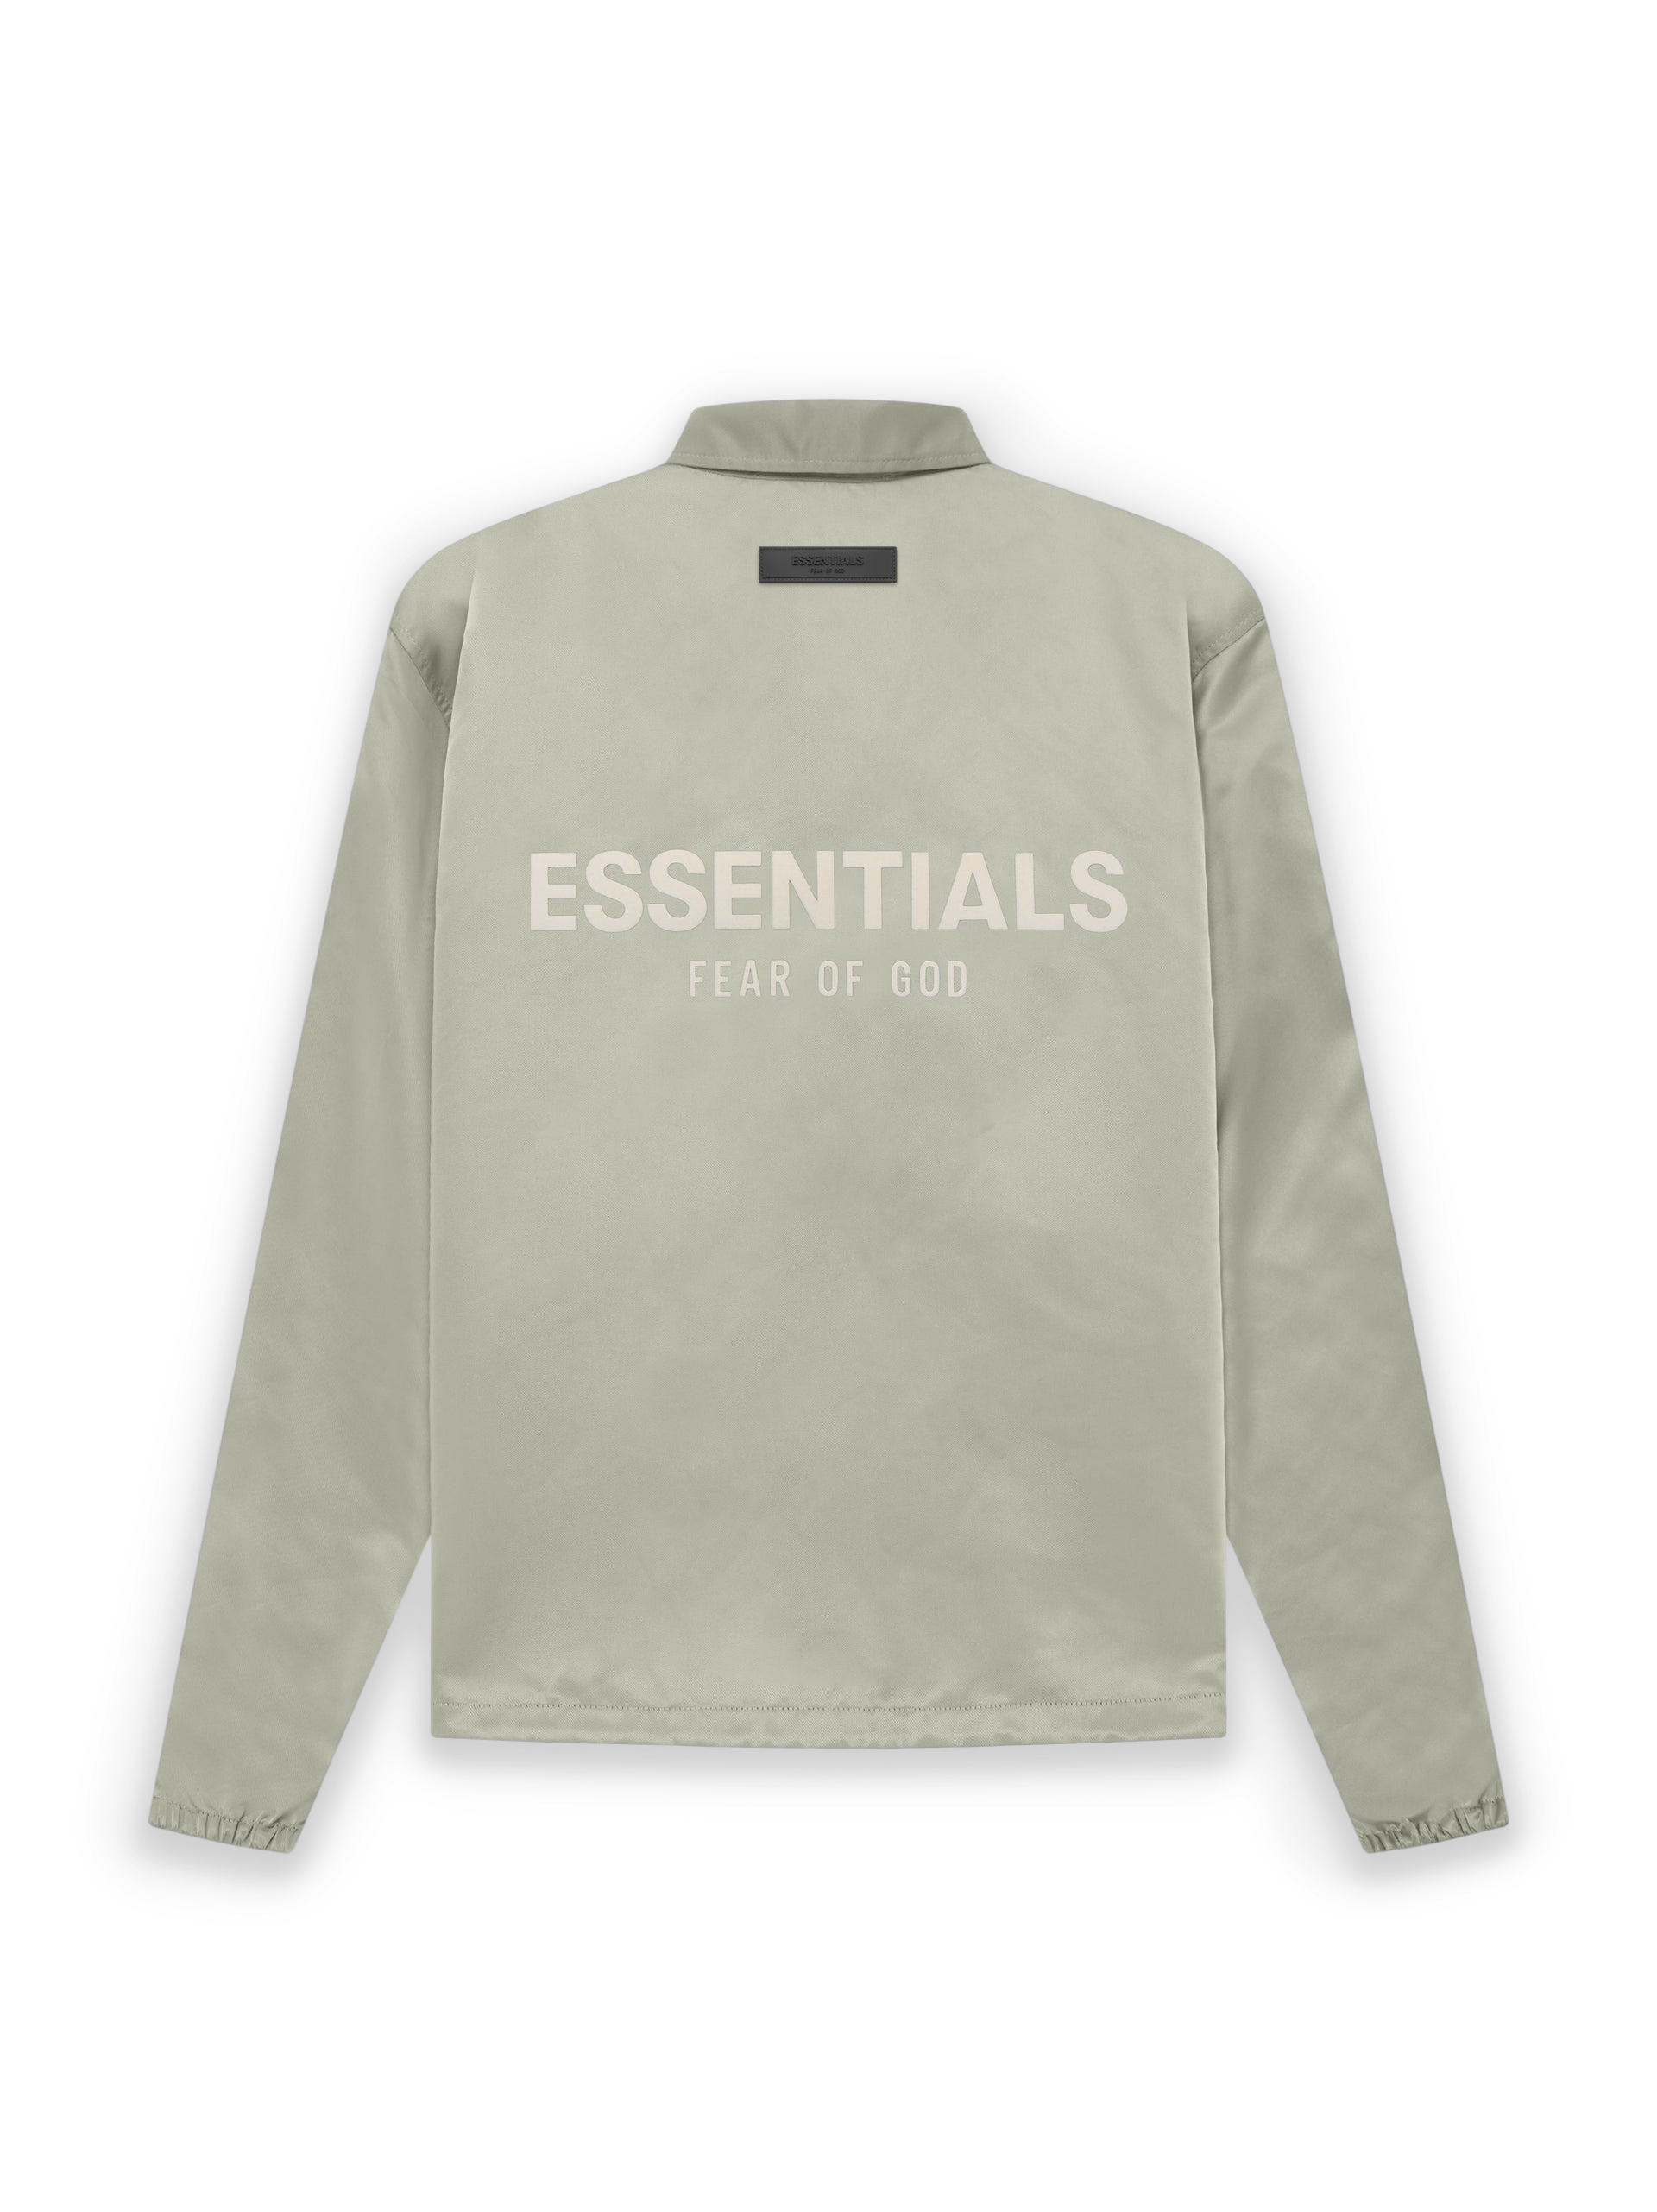 FEAR OF GOD ESSENTIALS QUILTED Sea Foam-